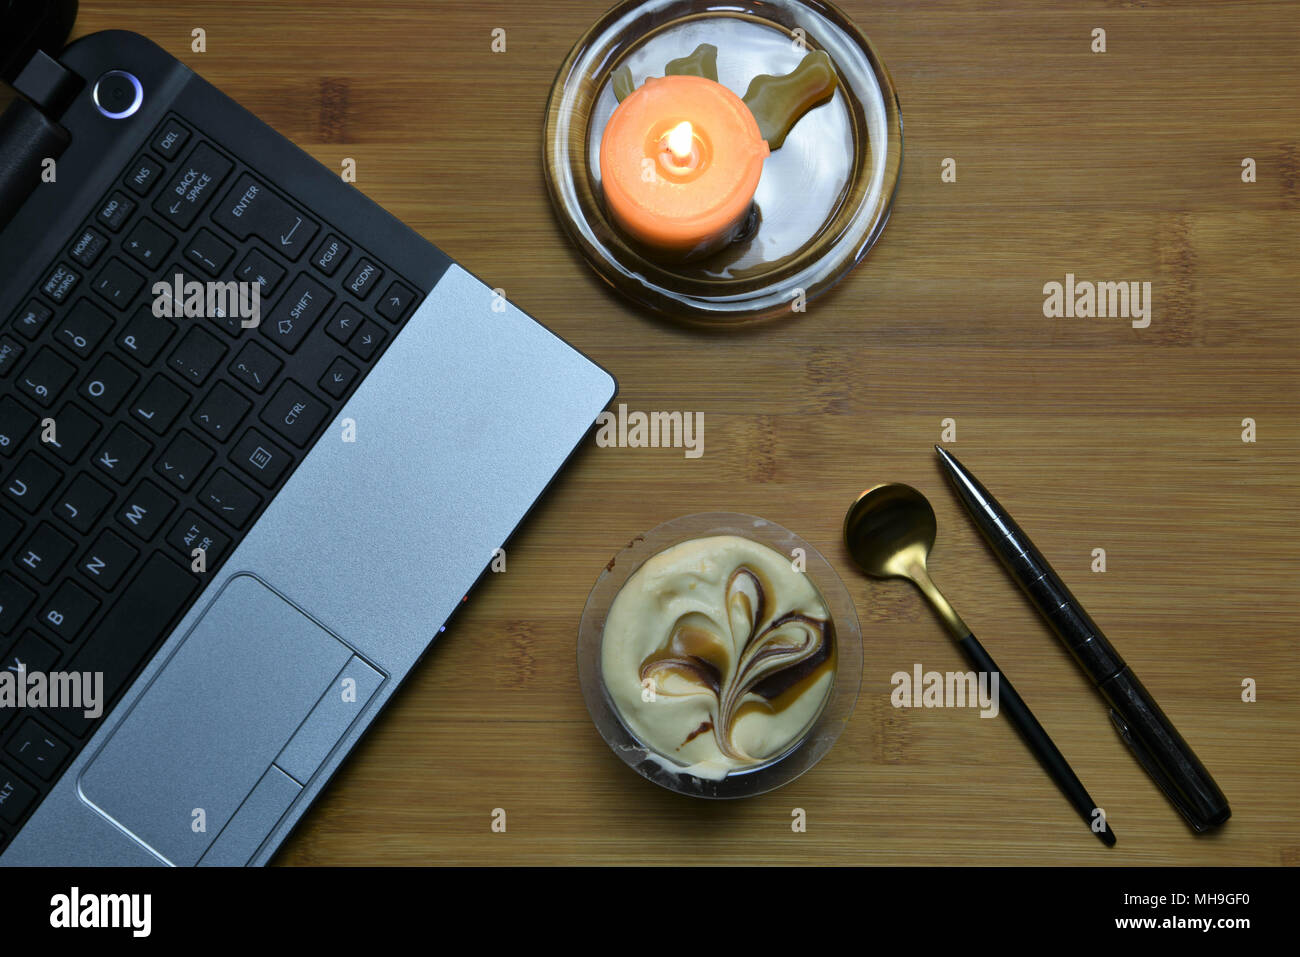 working late concept with laptop and candle Stock Photo